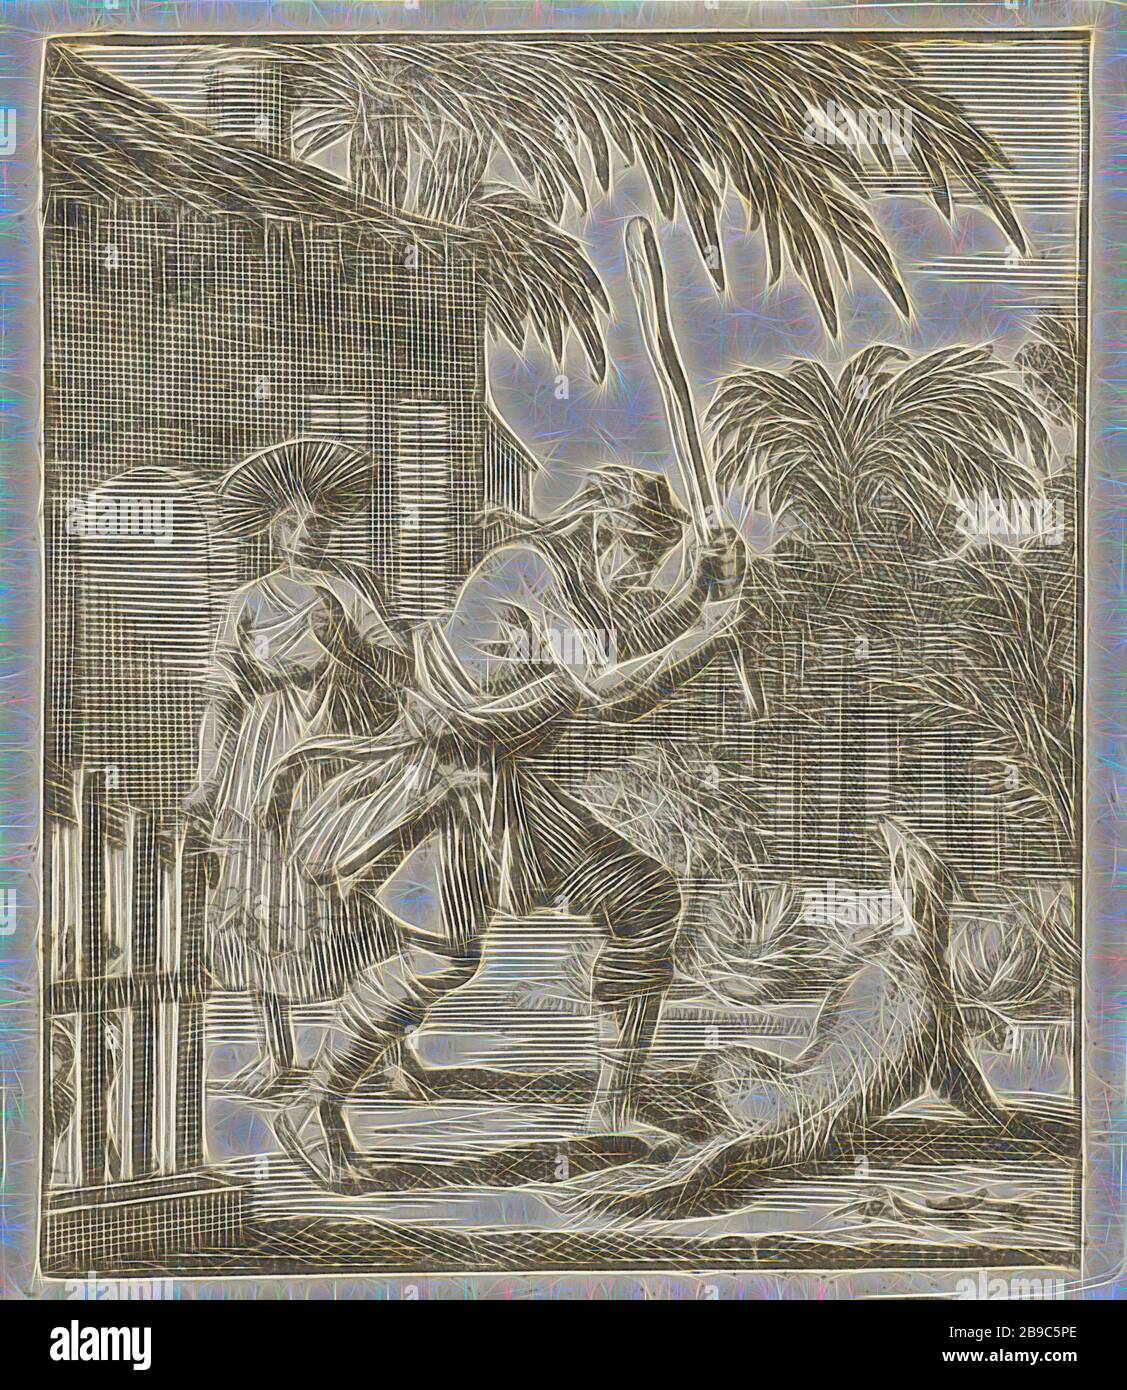 Fox killed by a man with a cane, beasts of prey, predatory animals: fox, man killing animal, Jan Luyken, Amsterdam, 1693, paper, etching, h 87 mm × w 75 mm, Reimagined by Gibon, design of warm cheerful glowing of brightness and light rays radiance. Classic art reinvented with a modern twist. Photography inspired by futurism, embracing dynamic energy of modern technology, movement, speed and revolutionize culture. Stock Photo